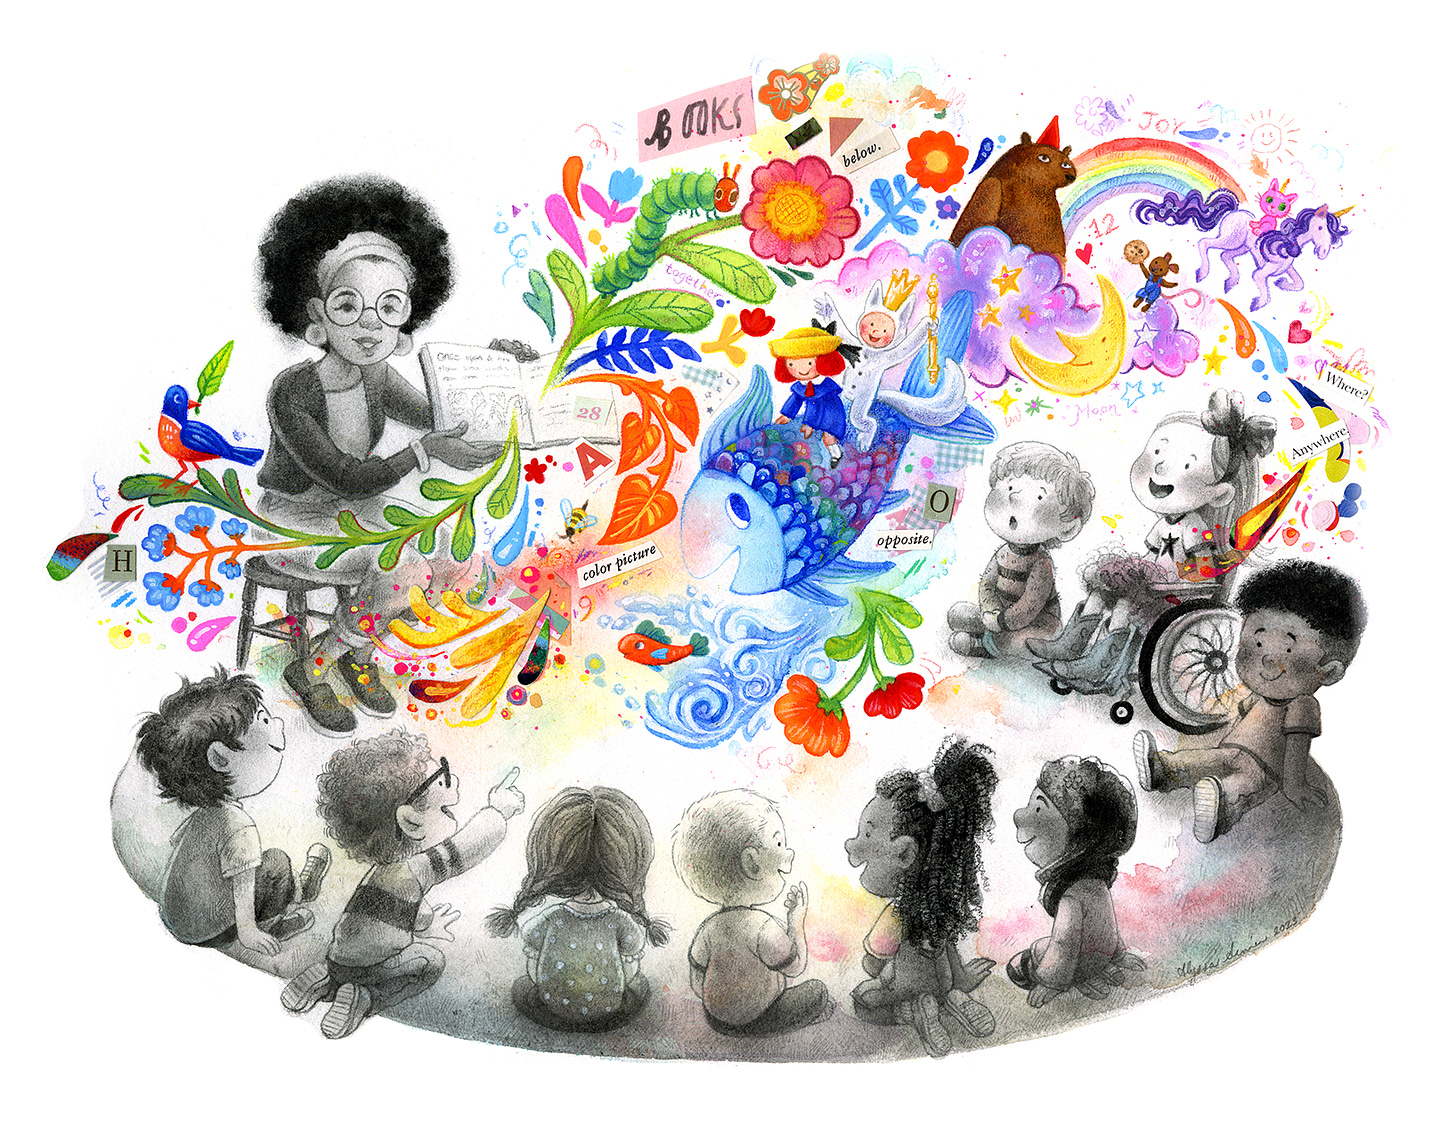 A mixed media illustration by Alyssa Sinnen, depicting a black teacher reading to her class. The figures are rendered in black and white. The book the teacher is holding bursts with color and fanciful imagery. Classic picture book characters come forth, like the Very Hungry Caterpillar, Rainbow Fish, Madeline, and Max. Contemporary characters are also present, including Bear from I Want My Hat Back, and Itty Bitty Kitty-Corn.